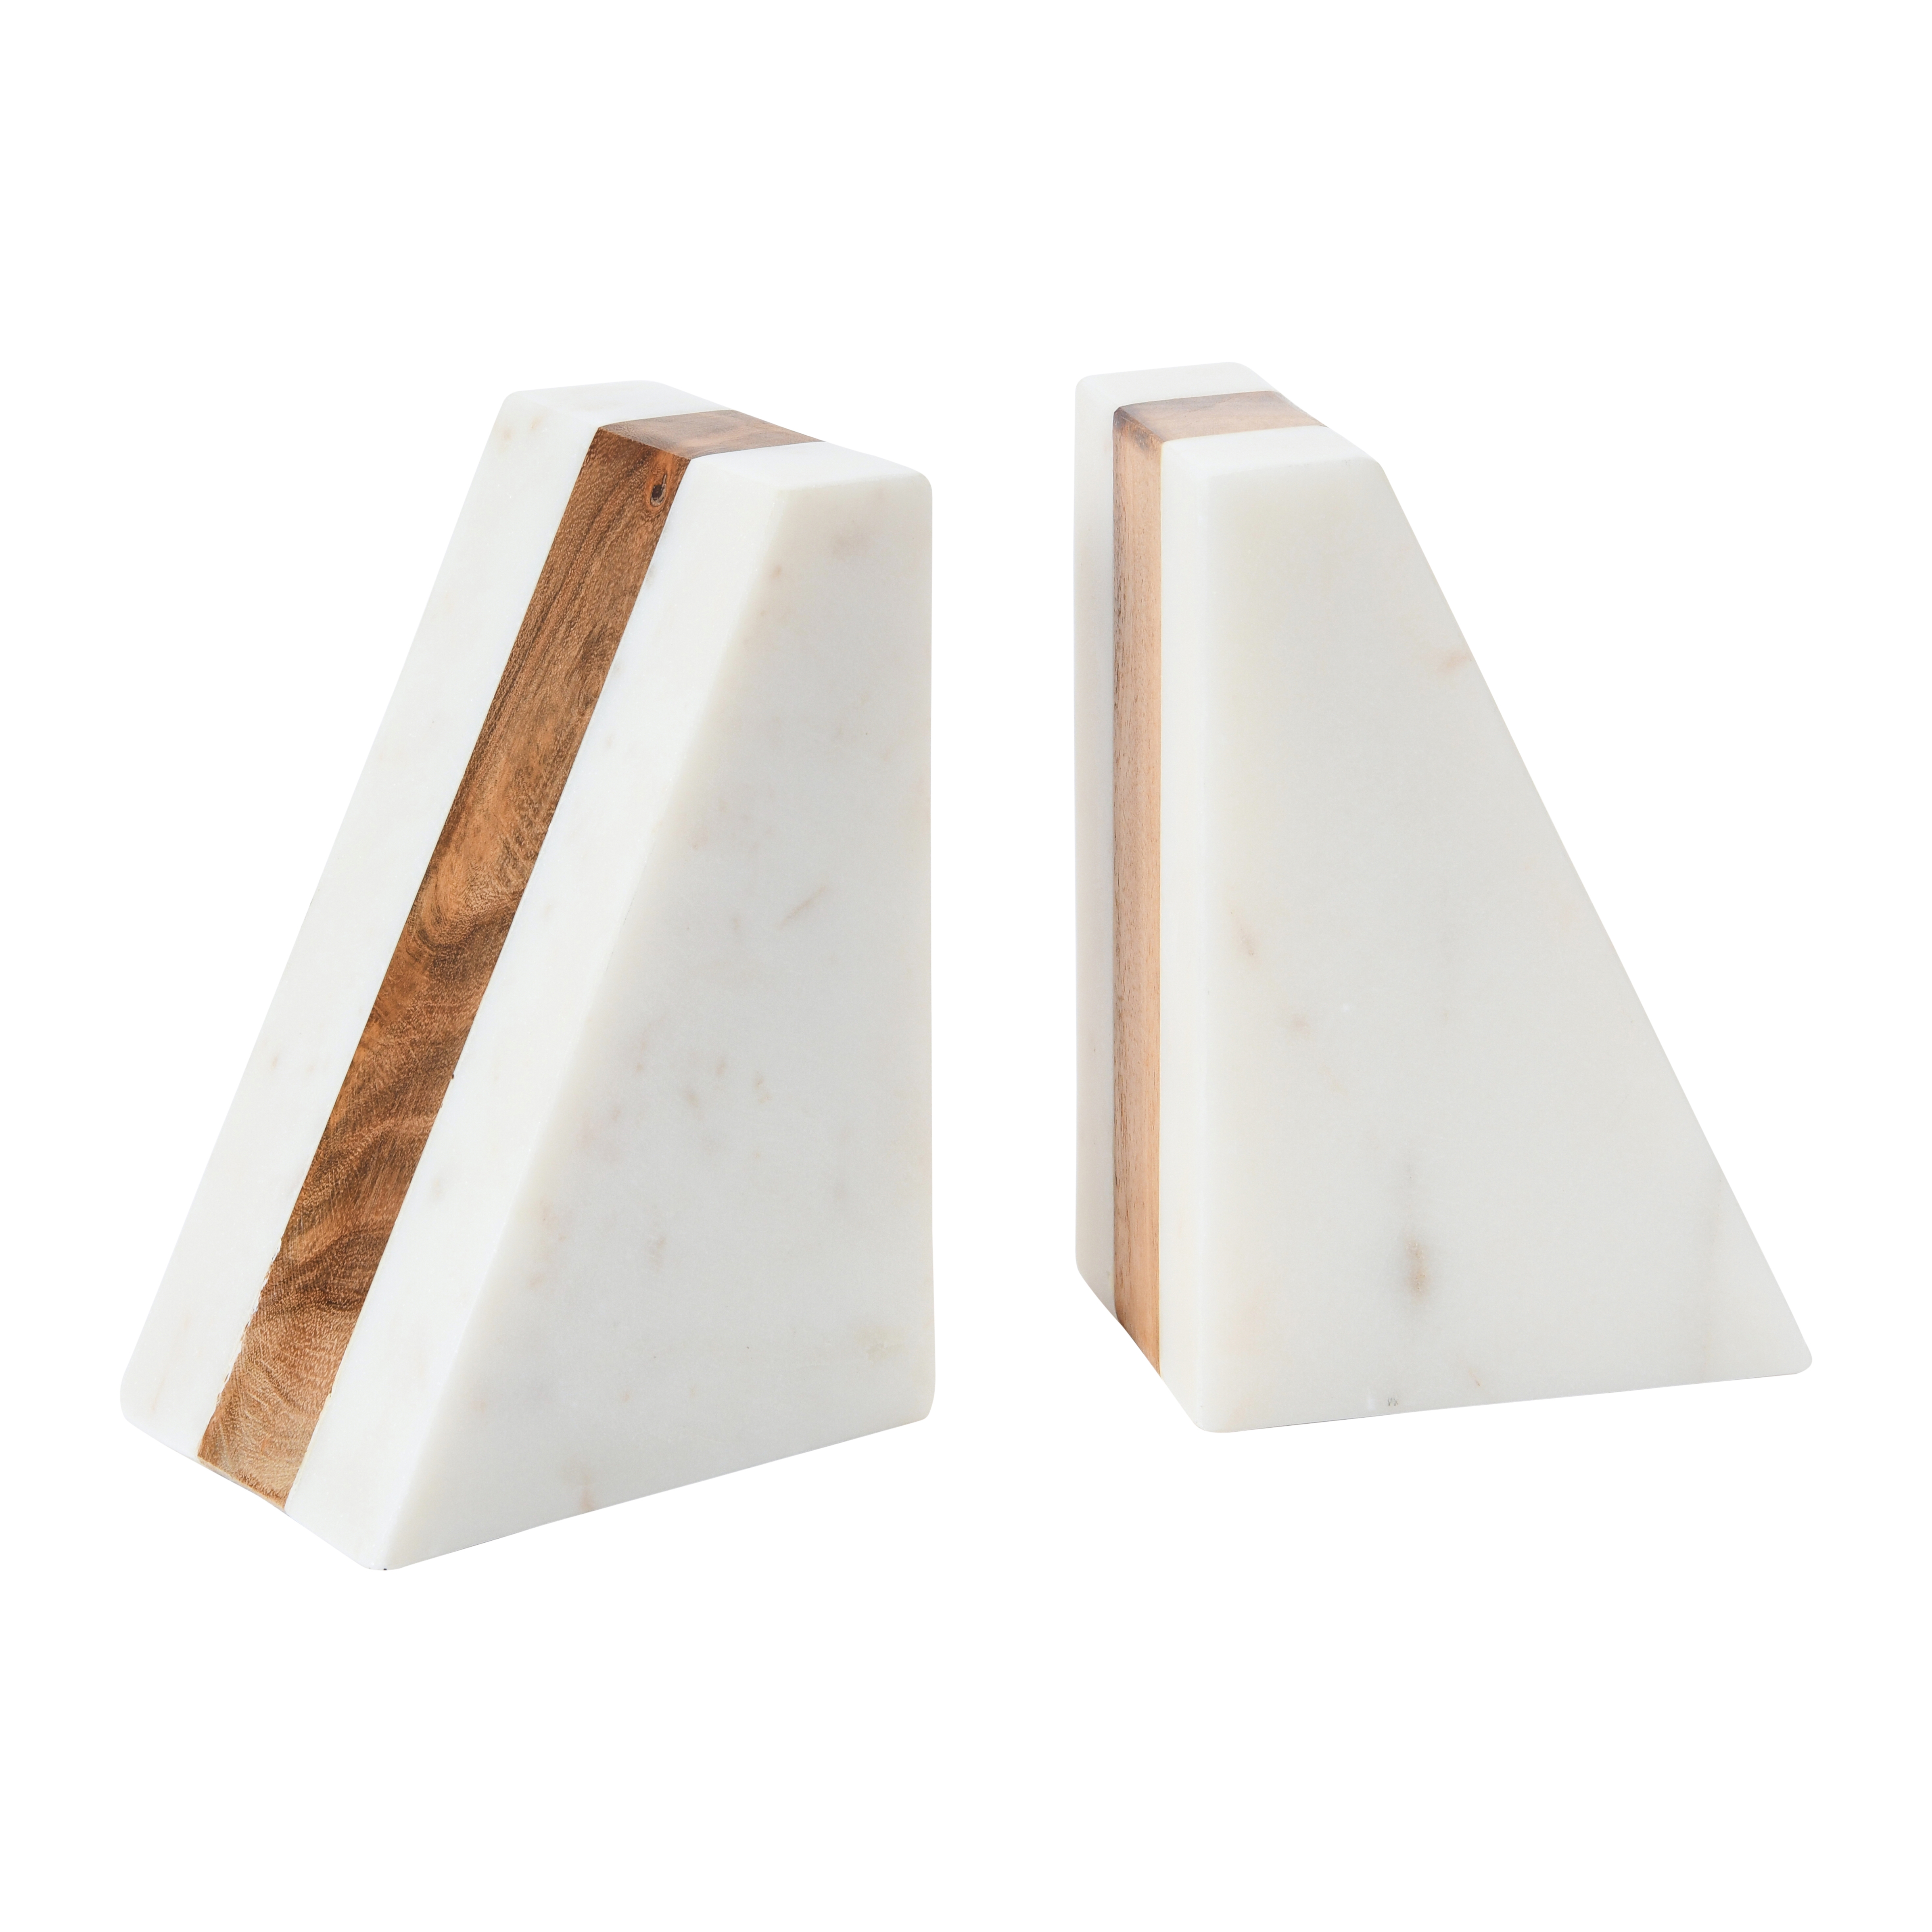 Marble Geometric Bookends with Wood Inlay, White - Image 0